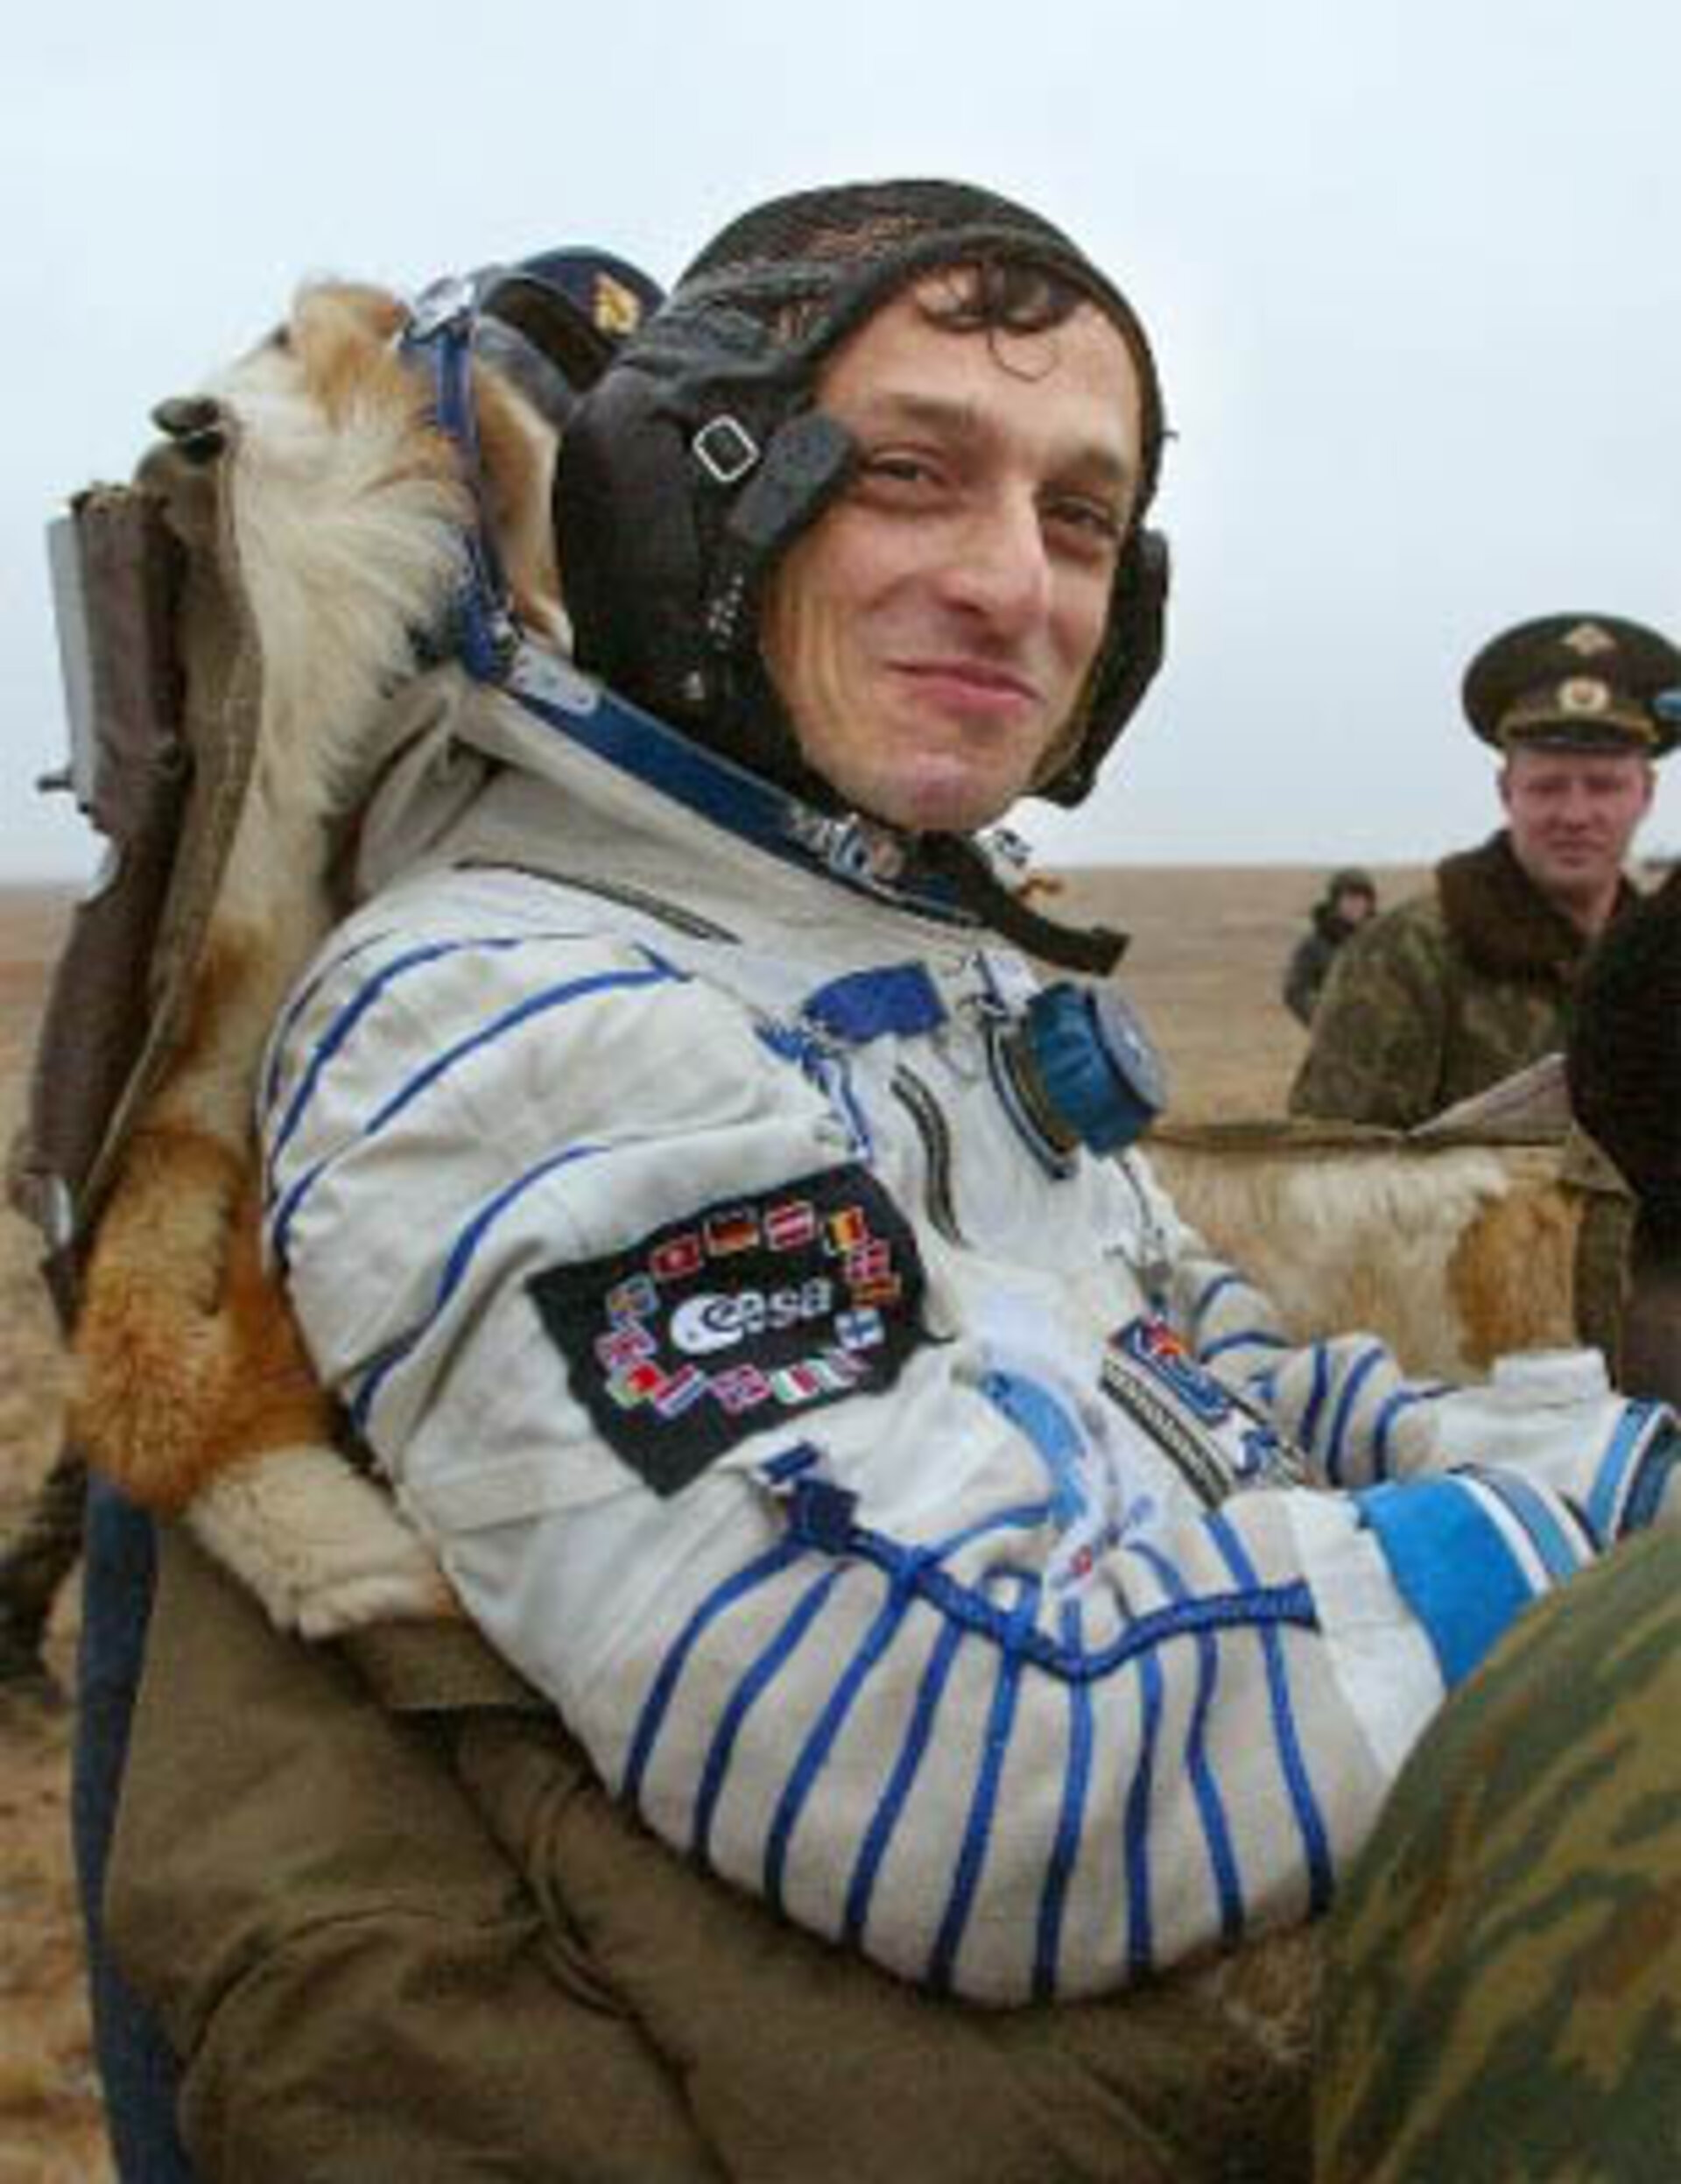 Spanish astronaut Pedro Duque shortly after landing